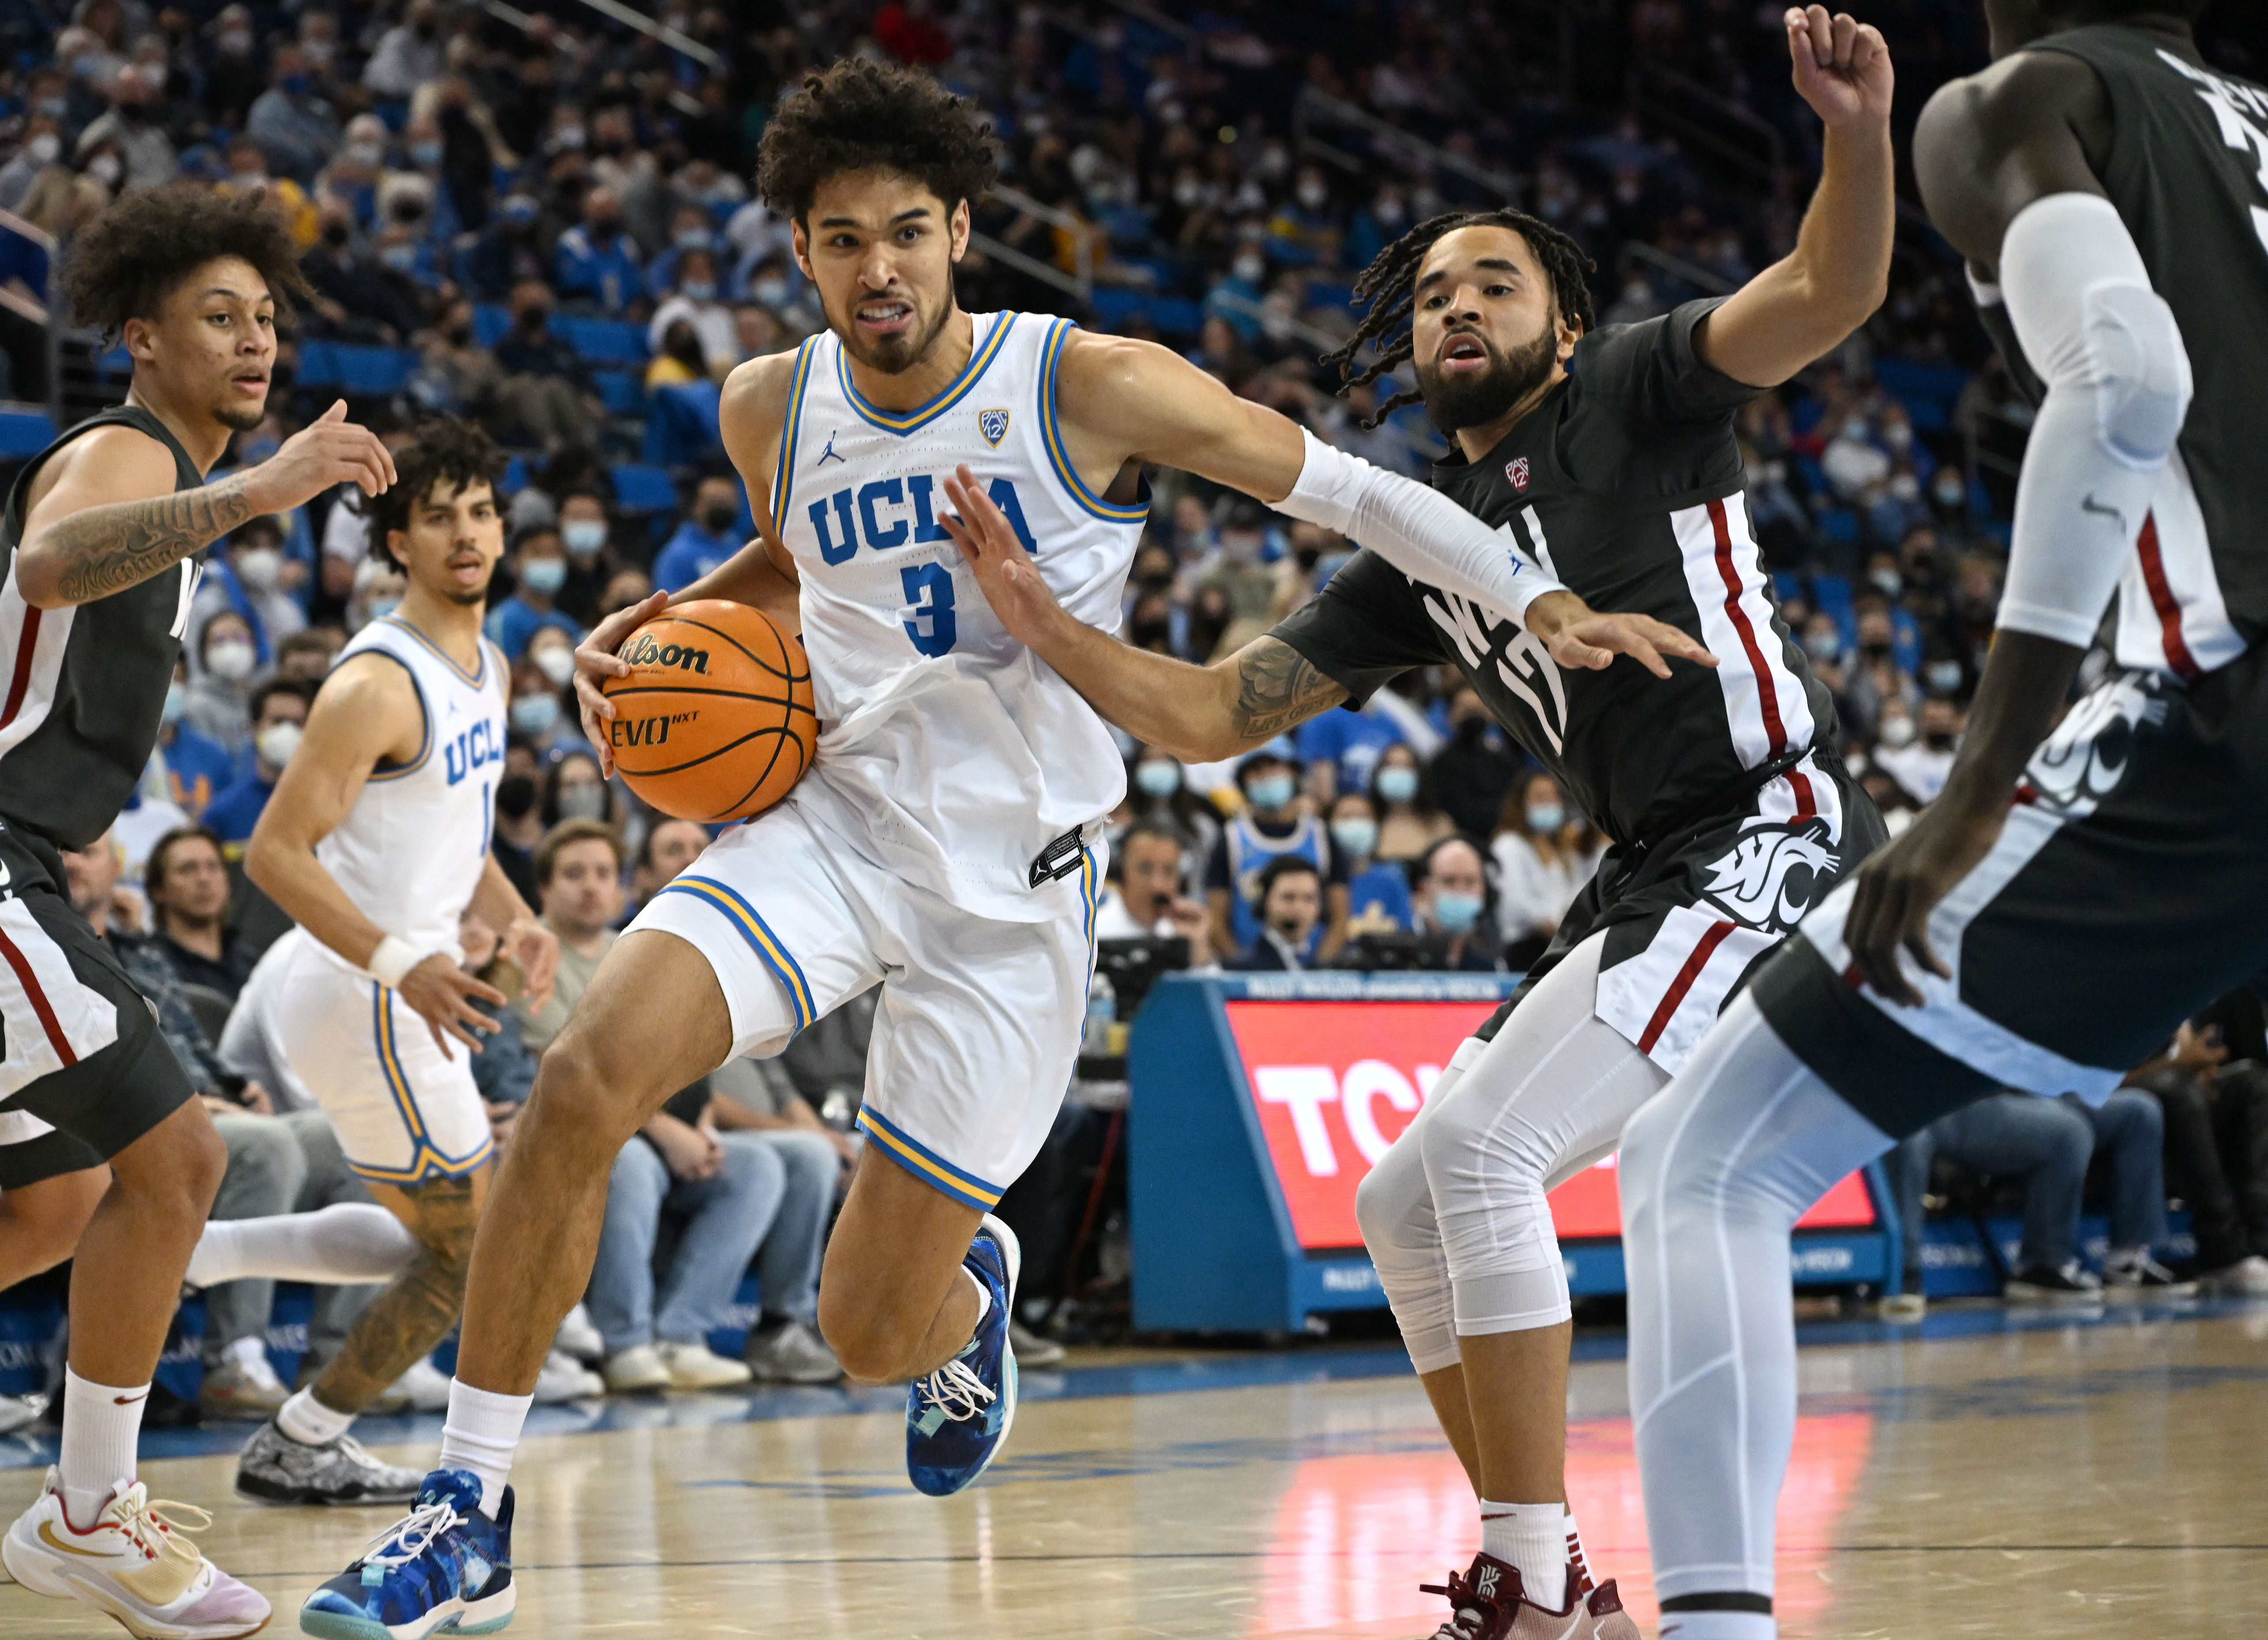 UCLA Bruins guard Johnny Juzang drives to the basket past Washington State Cougars guard Michael Flowers in the second half of the game at Pauley Pavilion presented by Wescom.&nbsp;